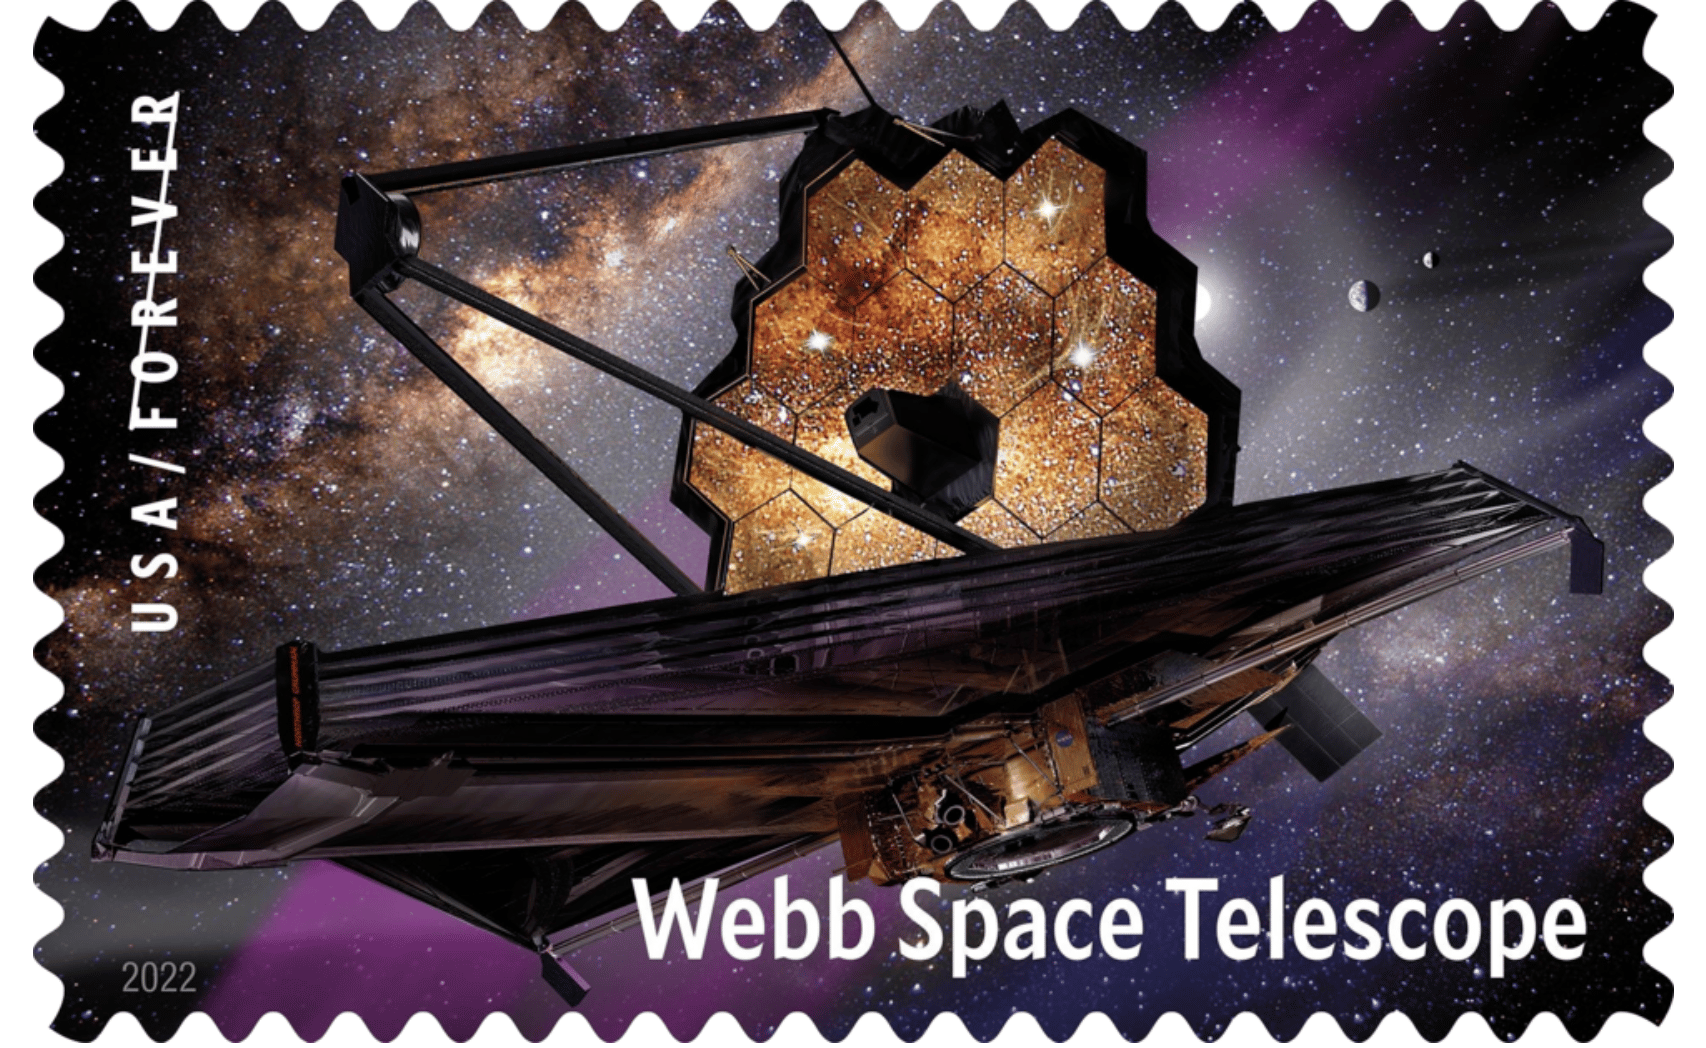 Newest Forever Stamp Honors the Mission of the James Webb Space Telescope